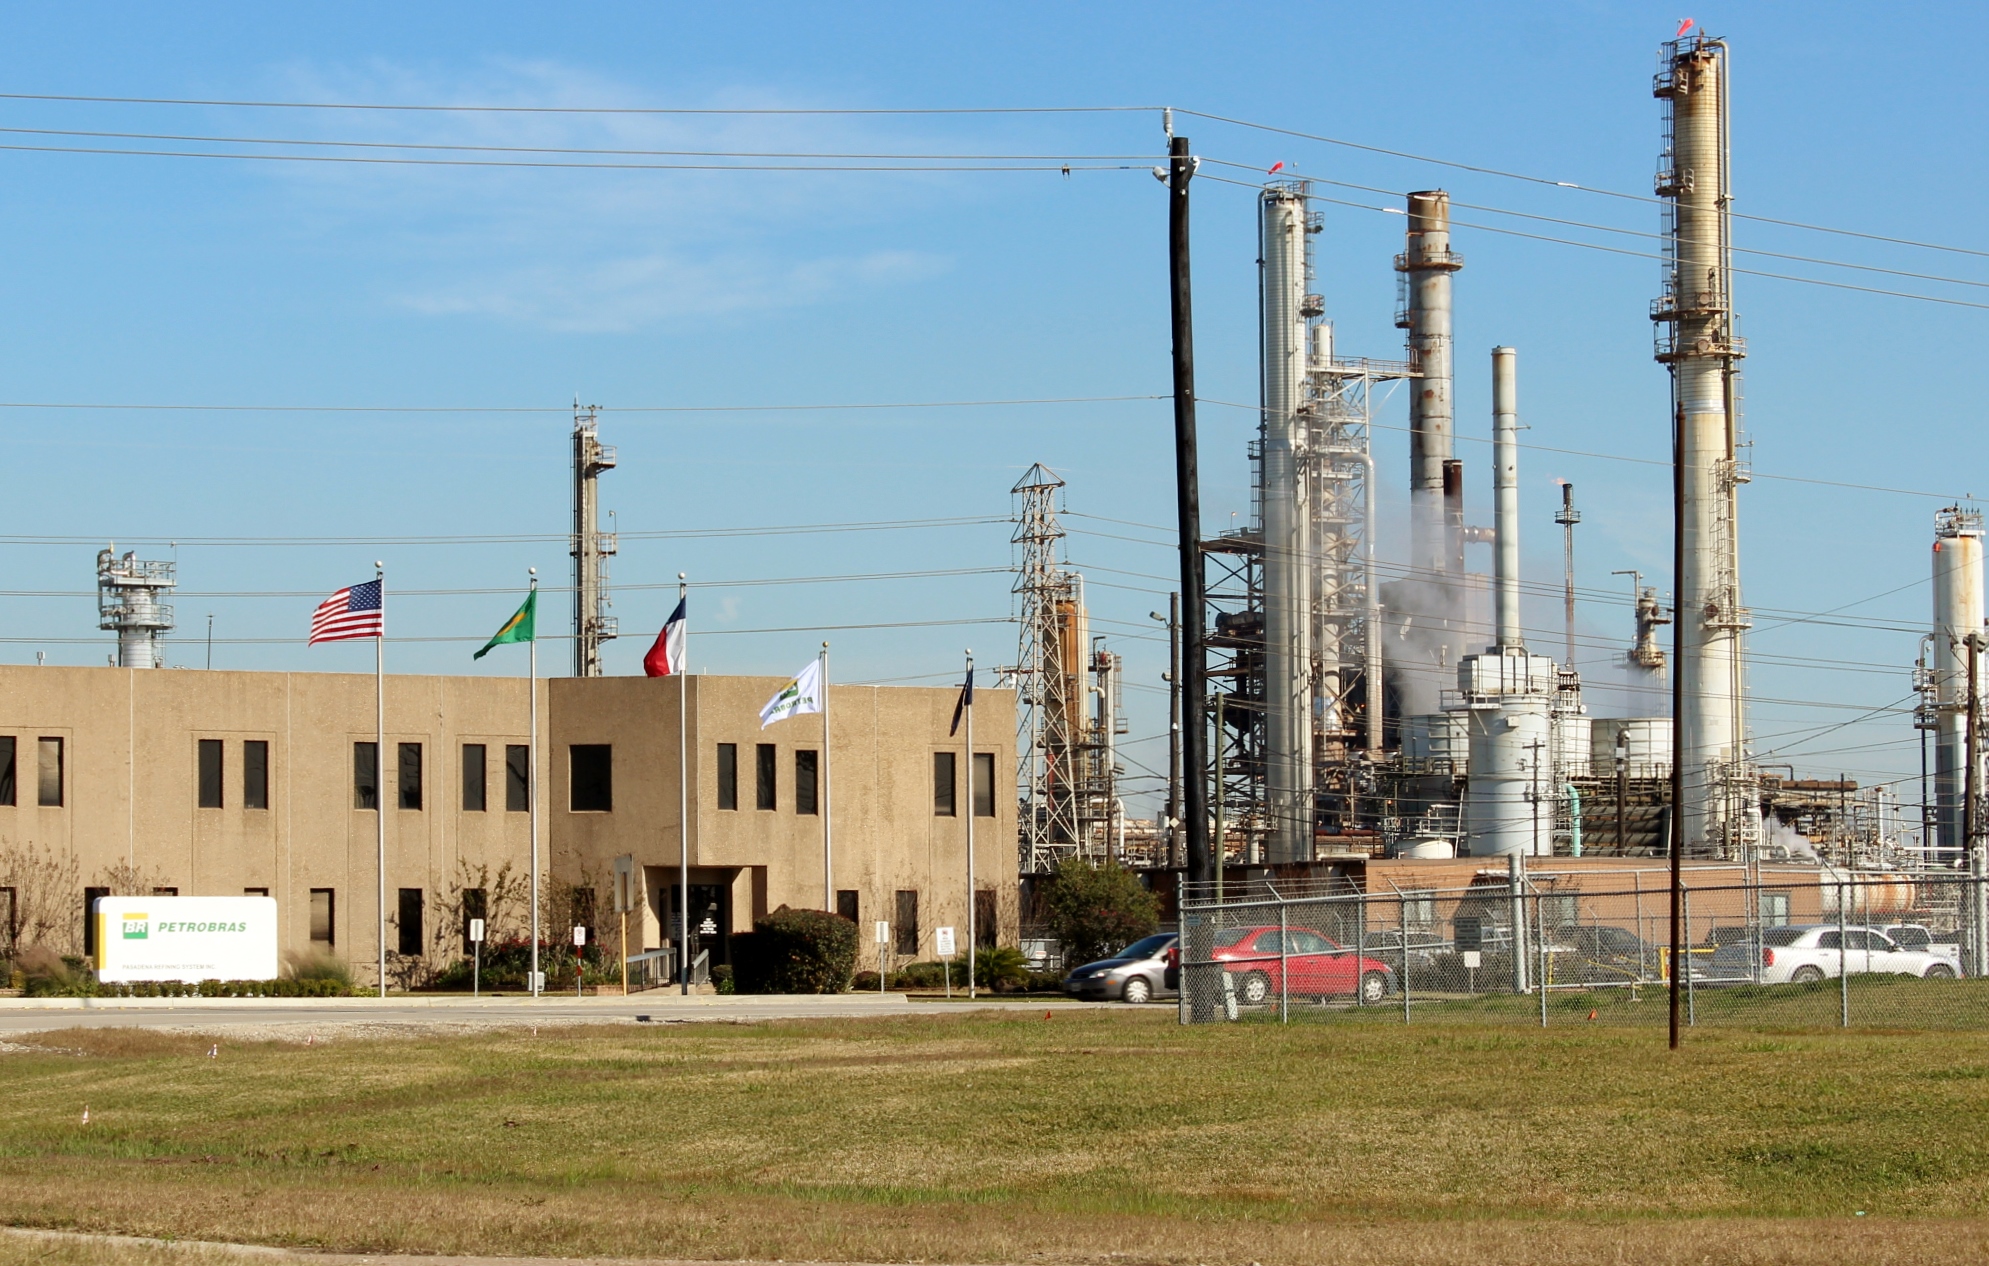 Petrobras's Pasadena Refining System plant is near the Washburn Tunnel on the Houston Ship Channel. Image: Dave Fehling, Houston Public Media